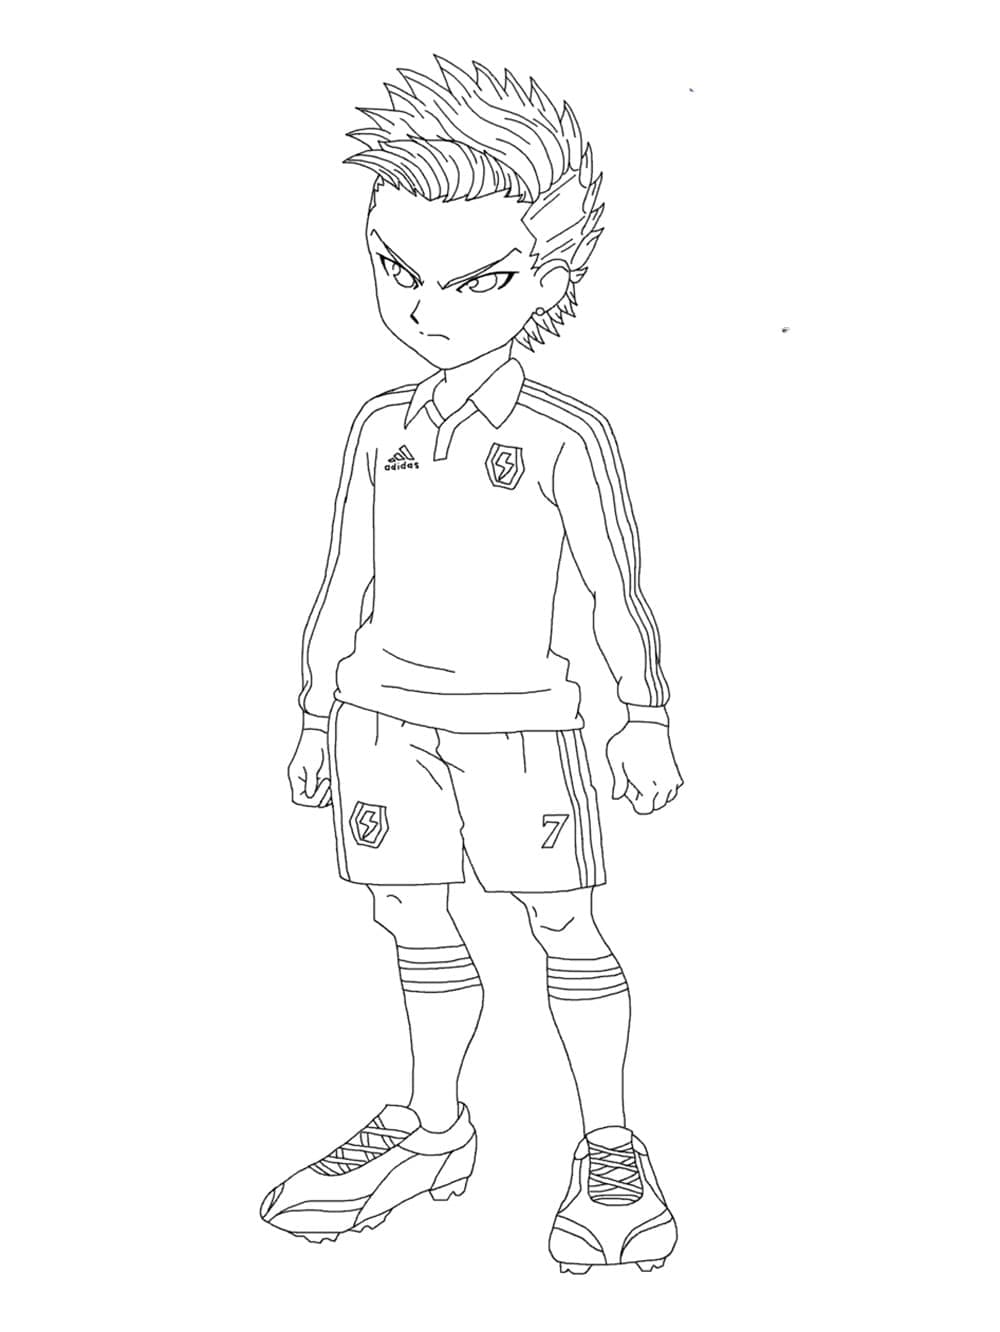 Character from Inazuma Eleven